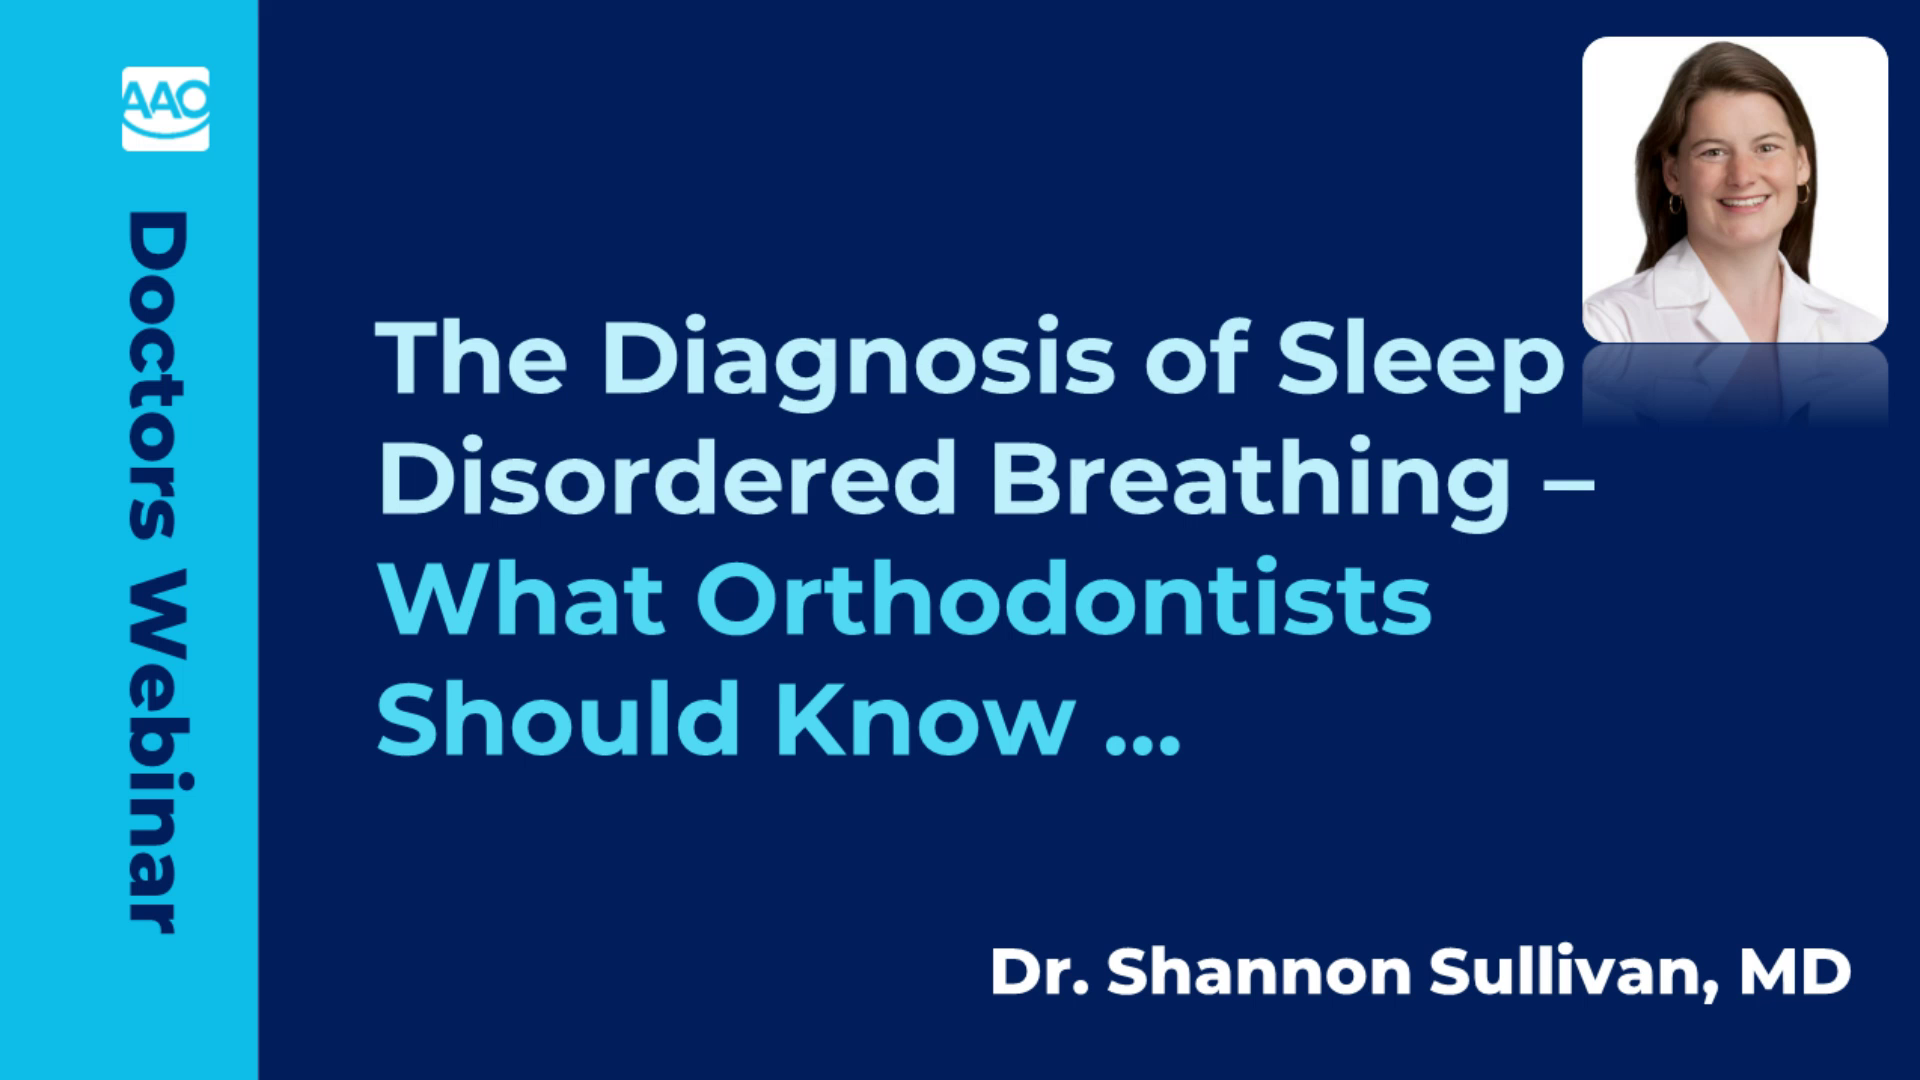 The Diagnosis of Sleep Disordered Breathing -- What Orthodontists Should Know icon